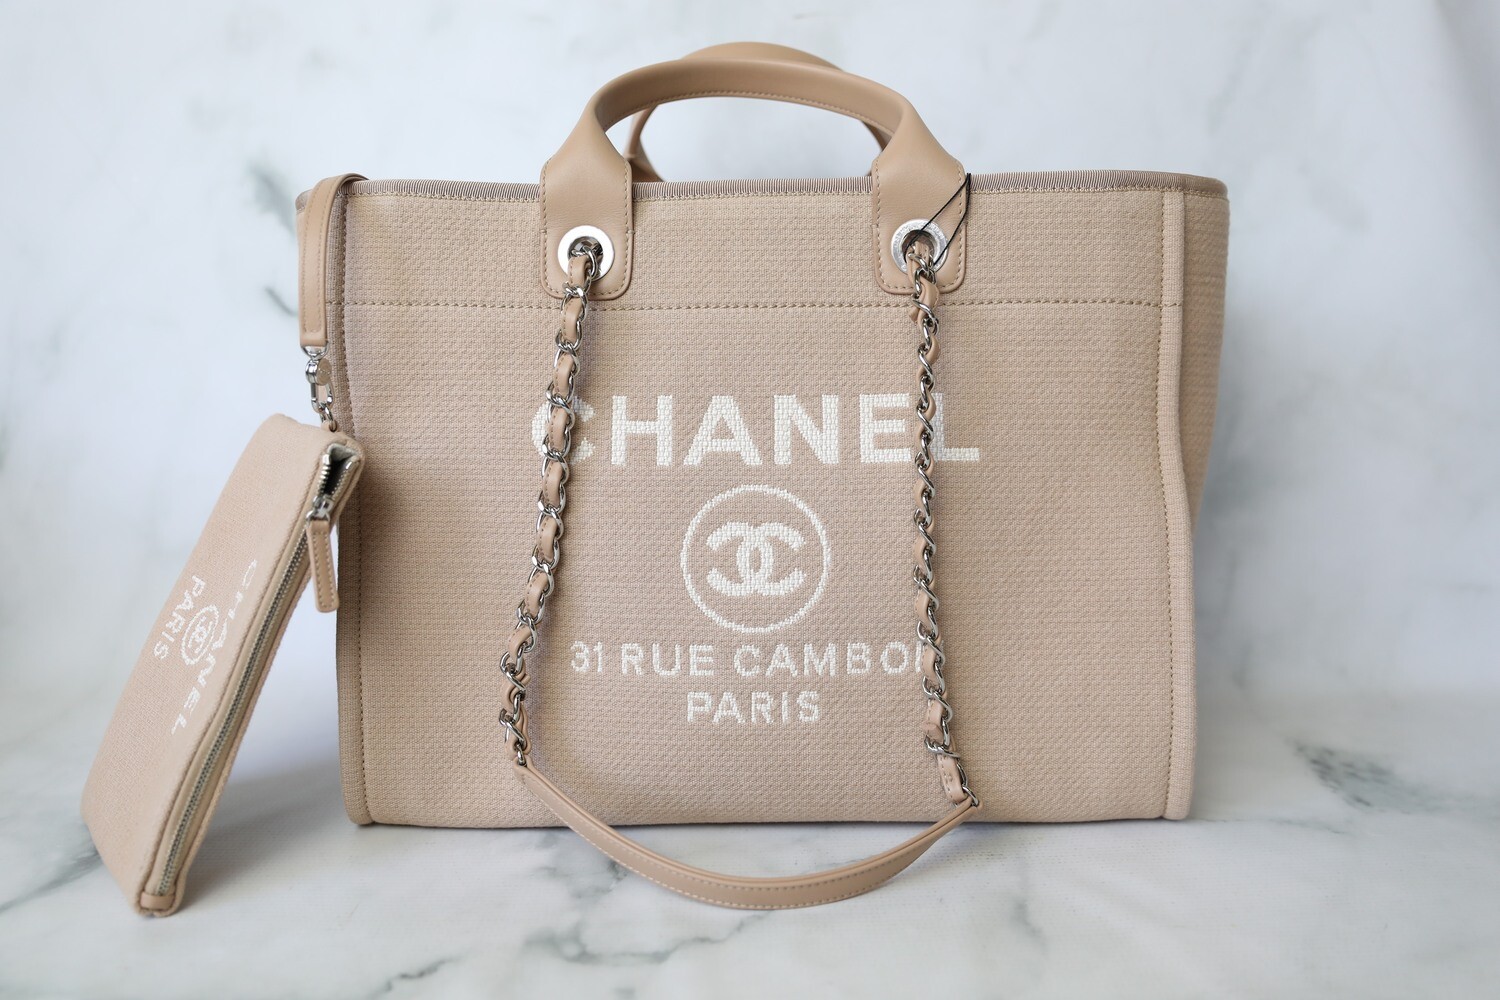 Chanel Deauville Large, Tan Beige Canvas with Silver Hardware, New in Box  WA001